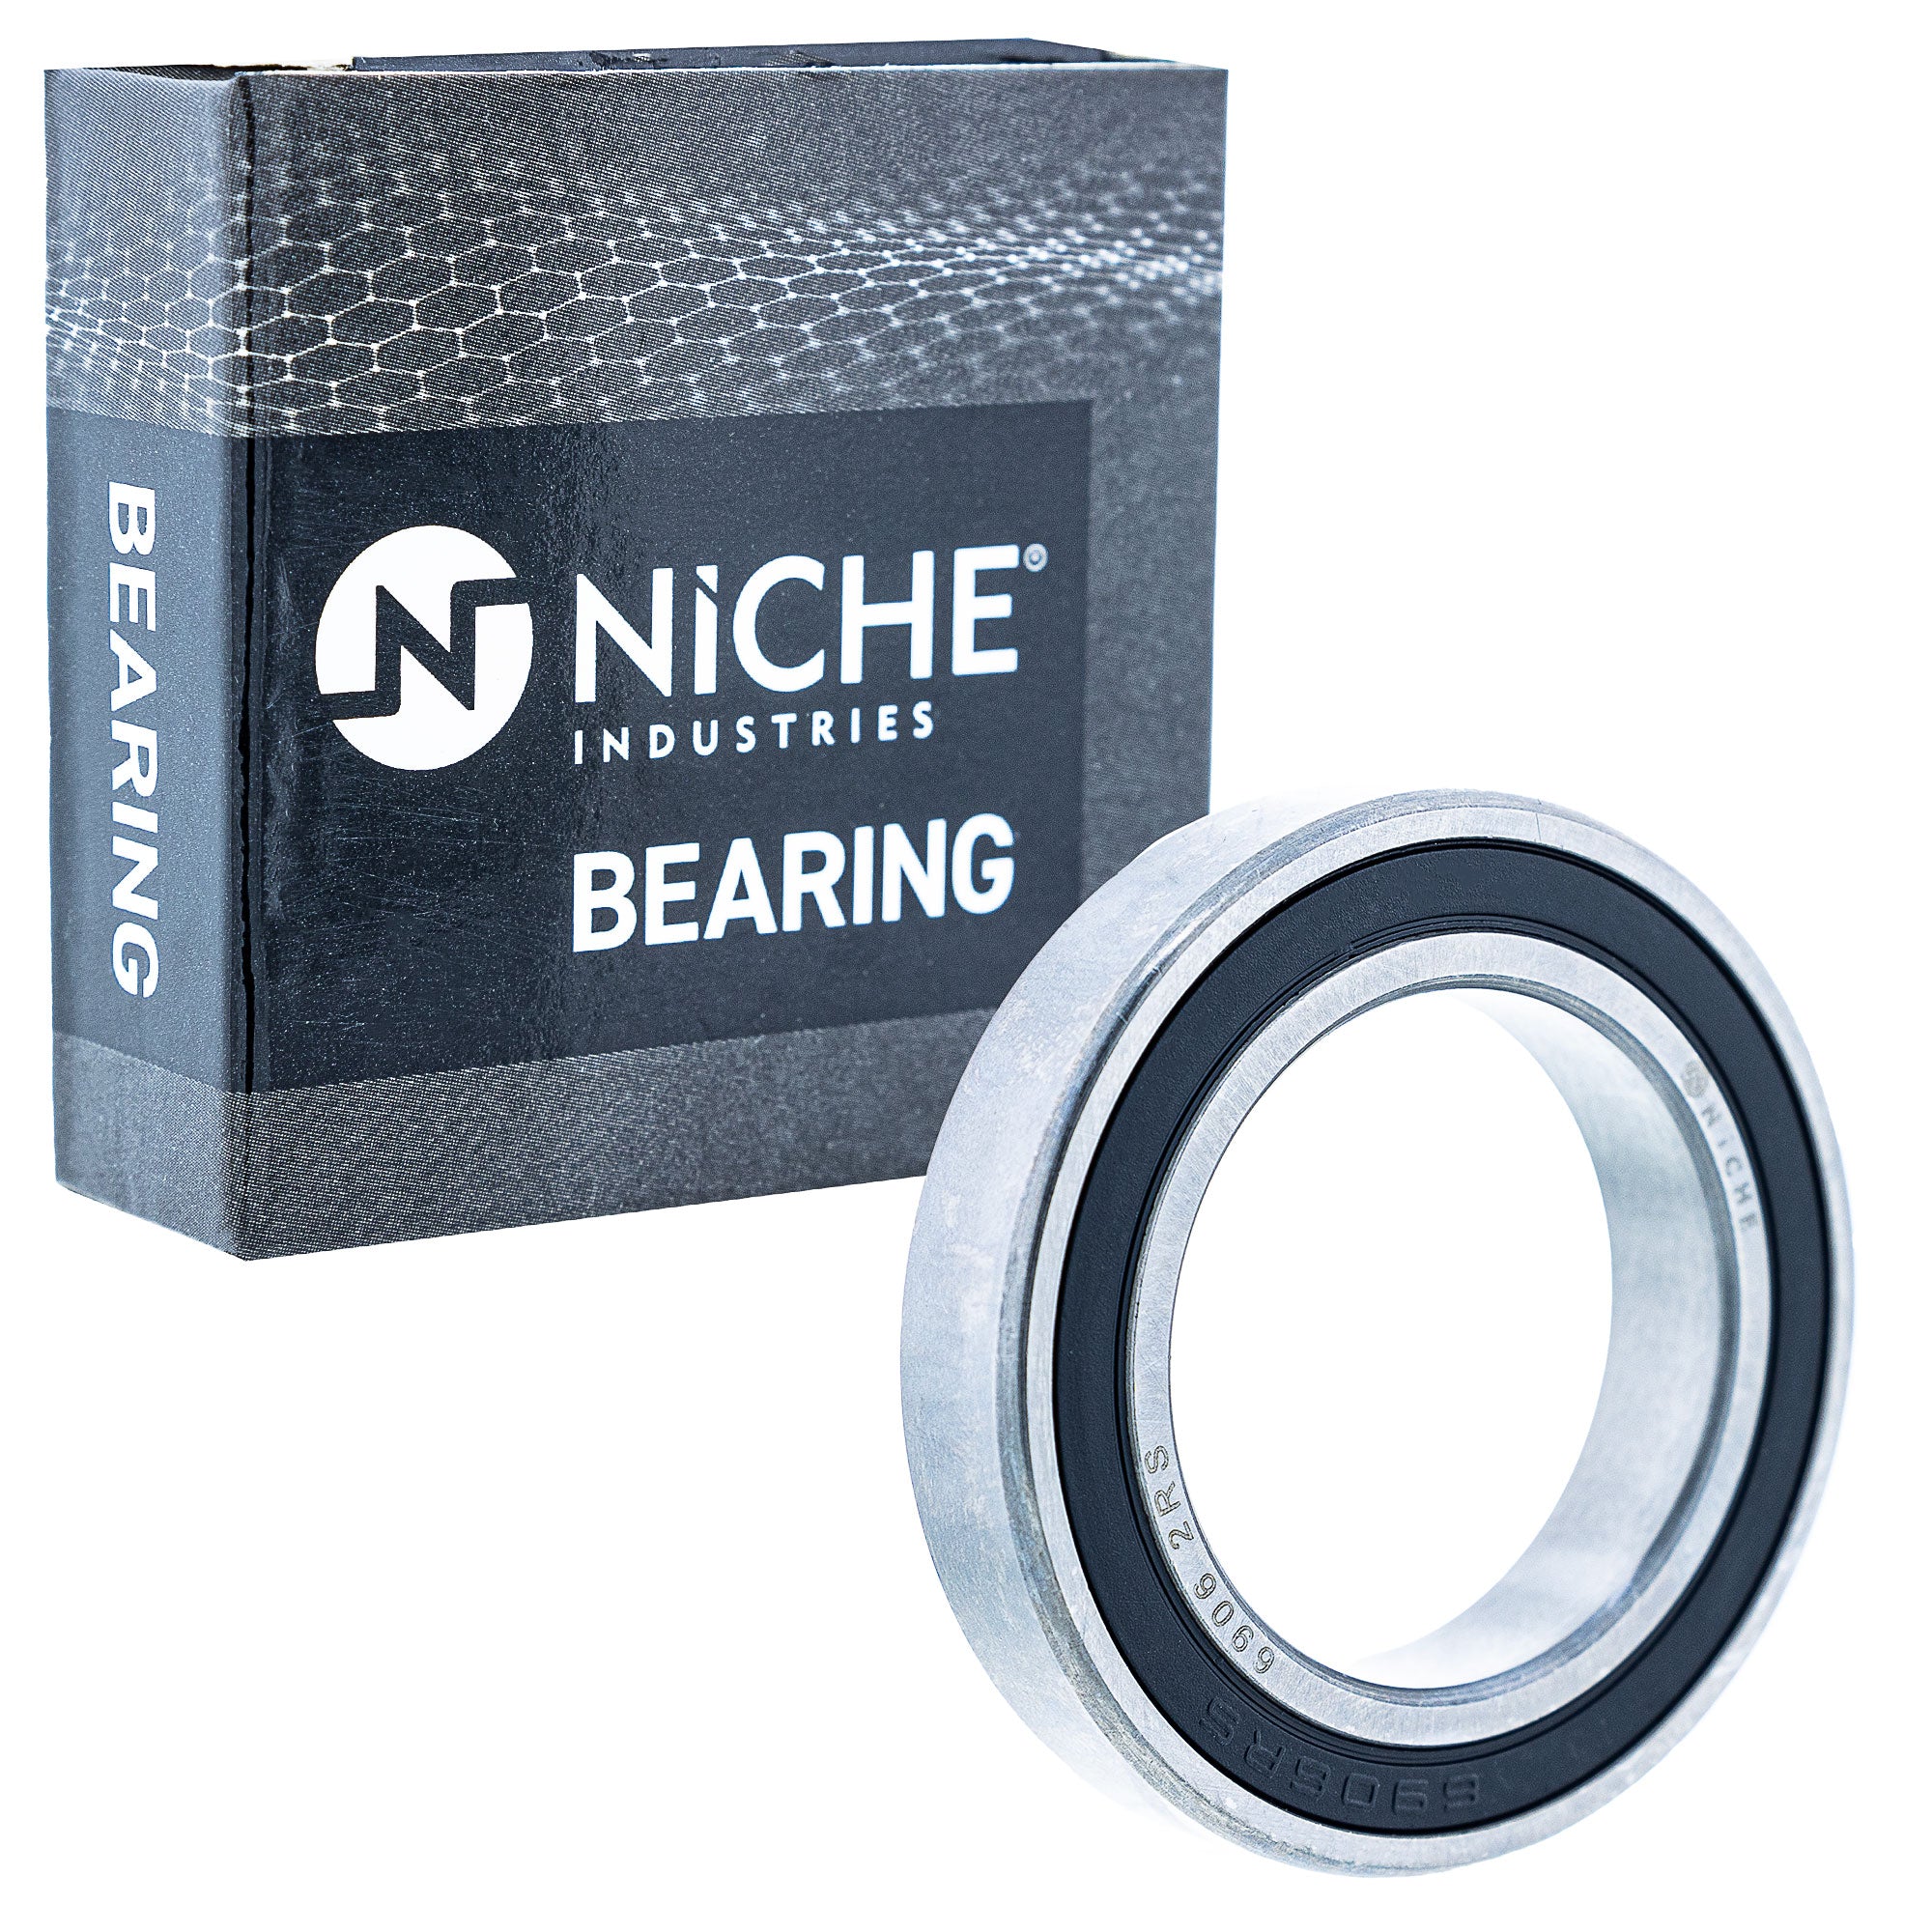 NICHE 519-CBB2250R Bearing & Seal Kit for zOTHER